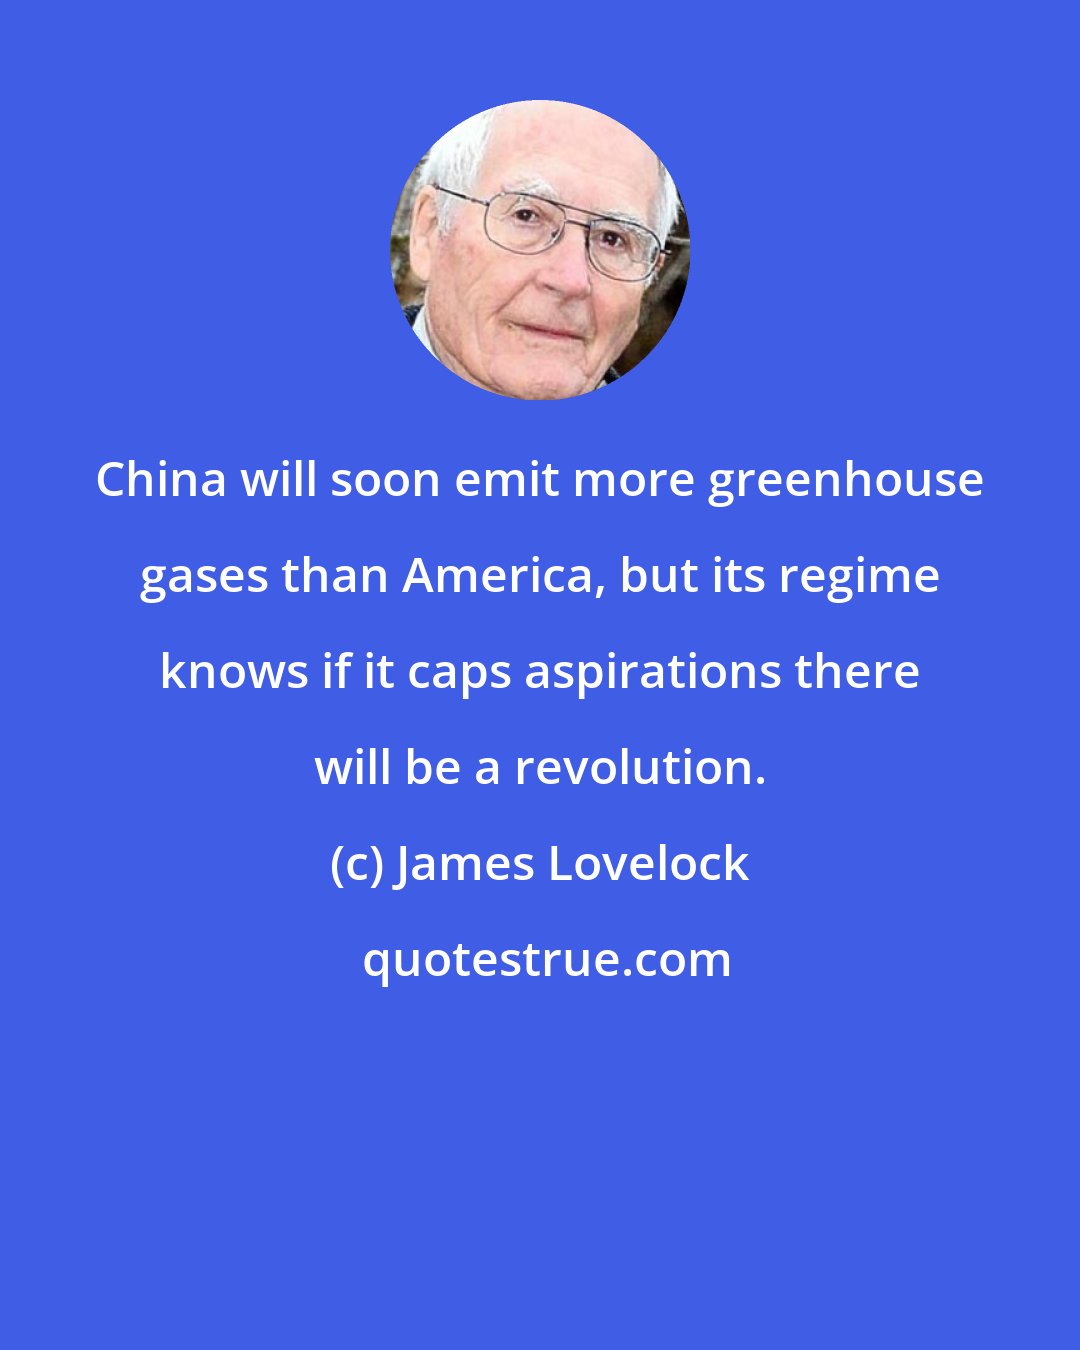 James Lovelock: China will soon emit more greenhouse gases than America, but its regime knows if it caps aspirations there will be a revolution.